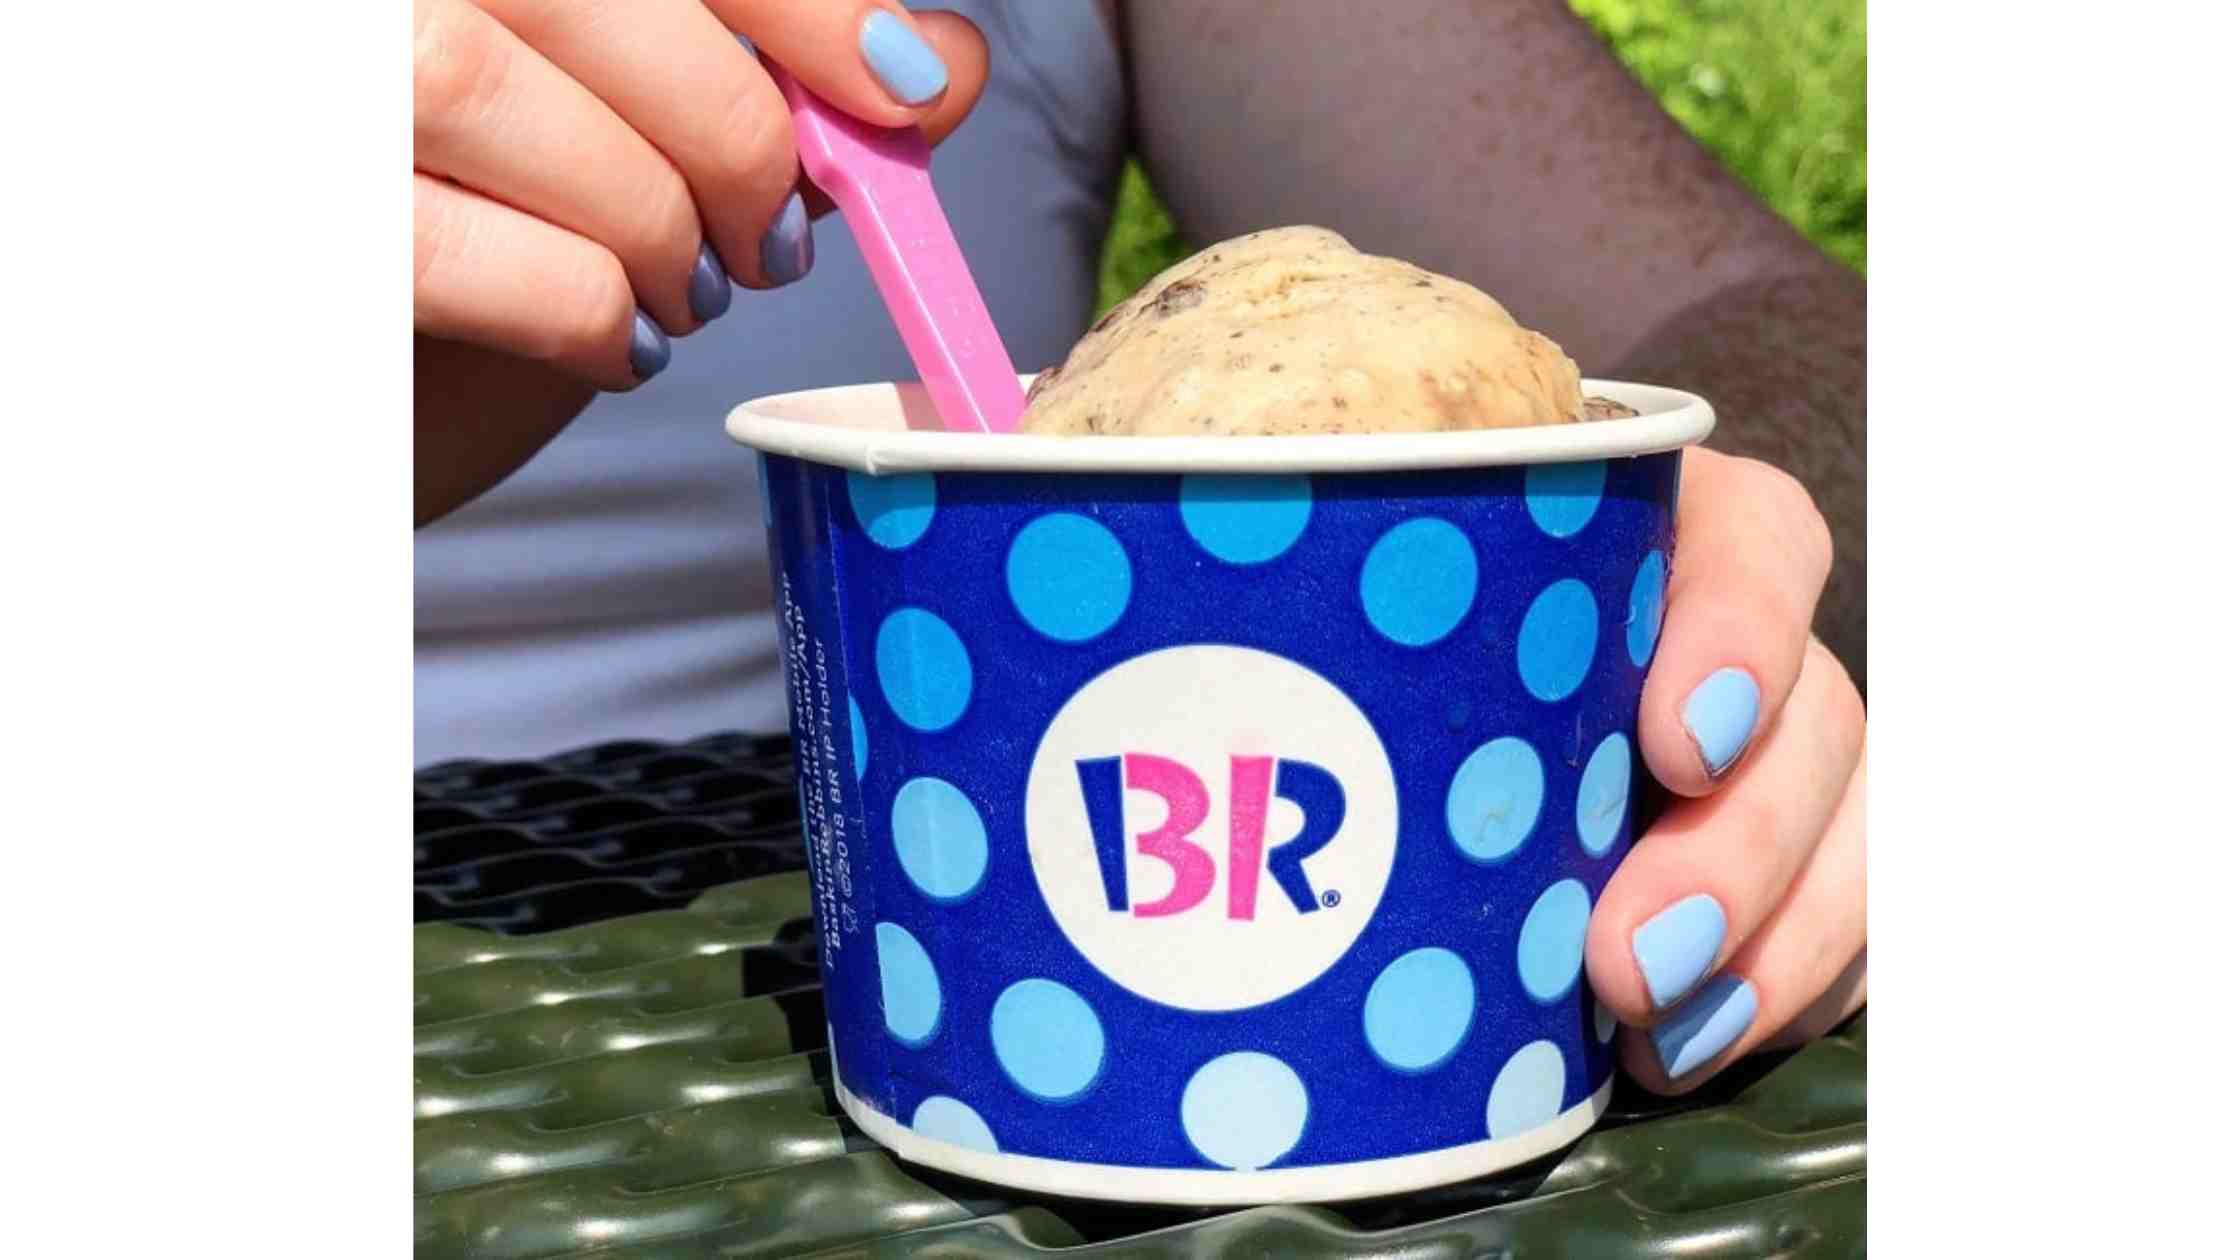 Is Baskin Robbins going out of business